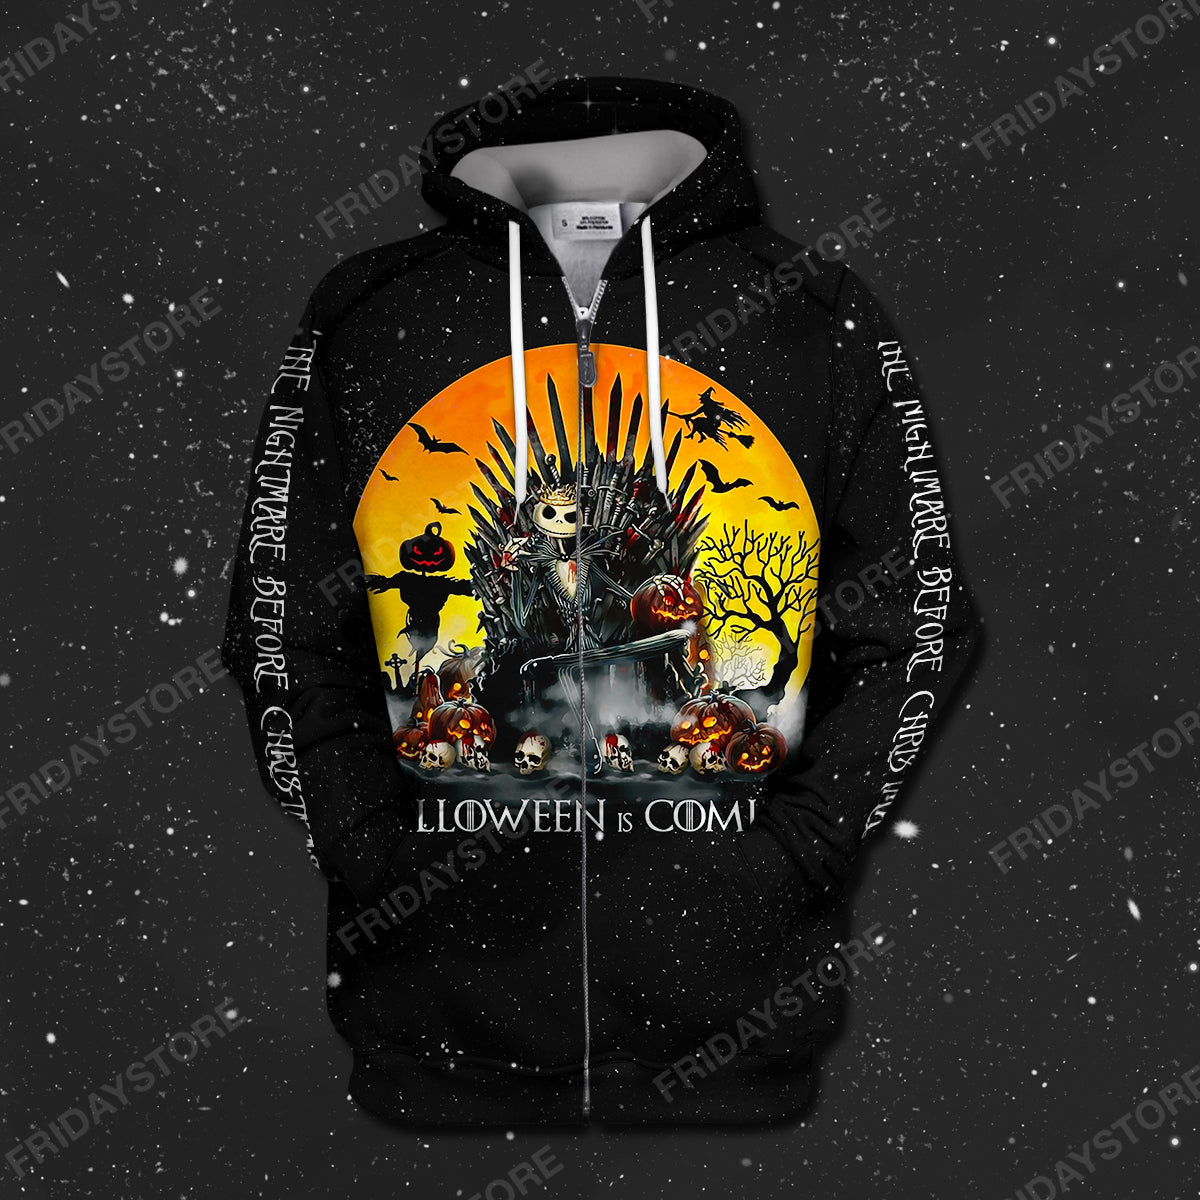 Unifinz TNBC T-shirt Jack Skellington On The Throne Halloween Is Coming T-shirt Cool Awesome TNBC Hoodie Sweater Tank 2026